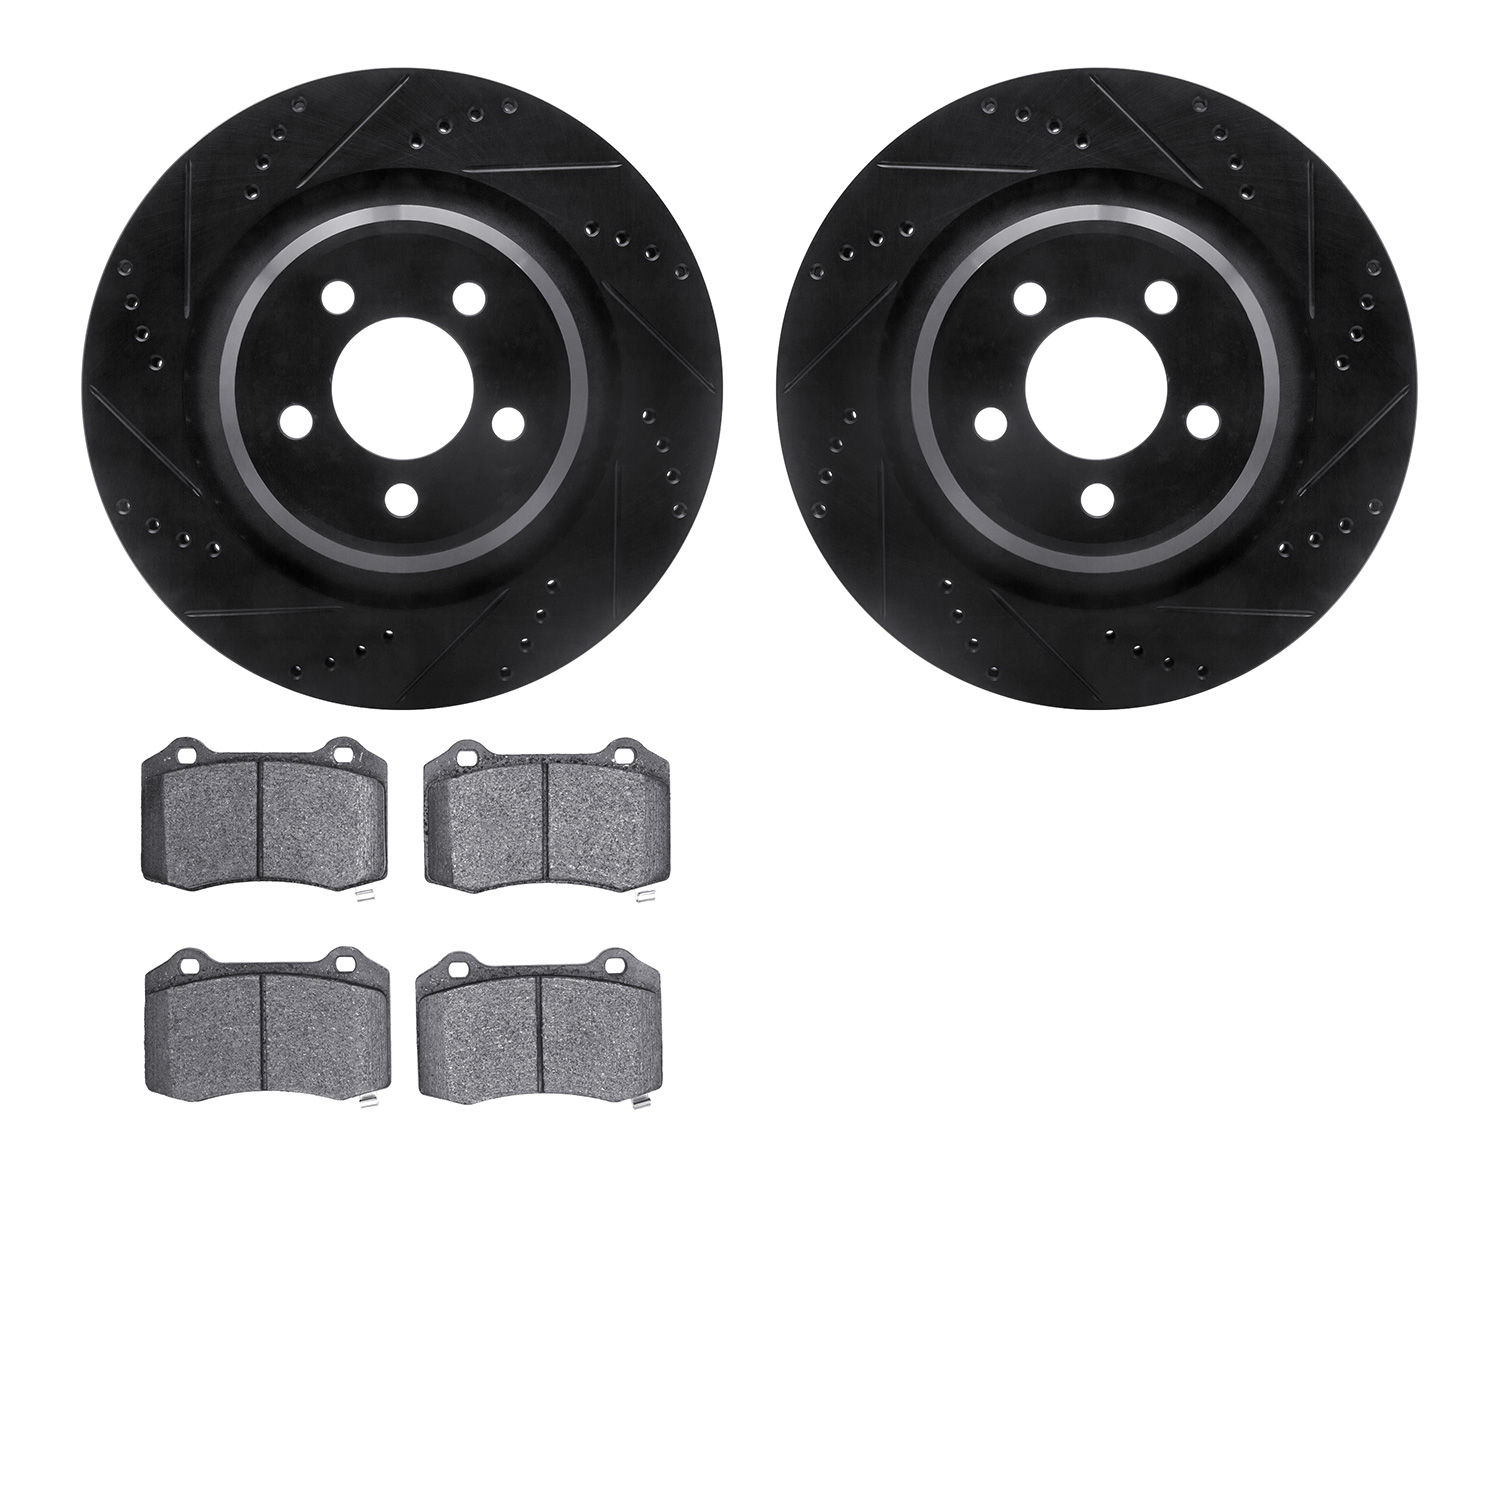 8402-39002 Drilled/Slotted Brake Rotors with Ultimate-Duty Brake Pads Kit [Black], Fits Select Mopar, Position: Rear